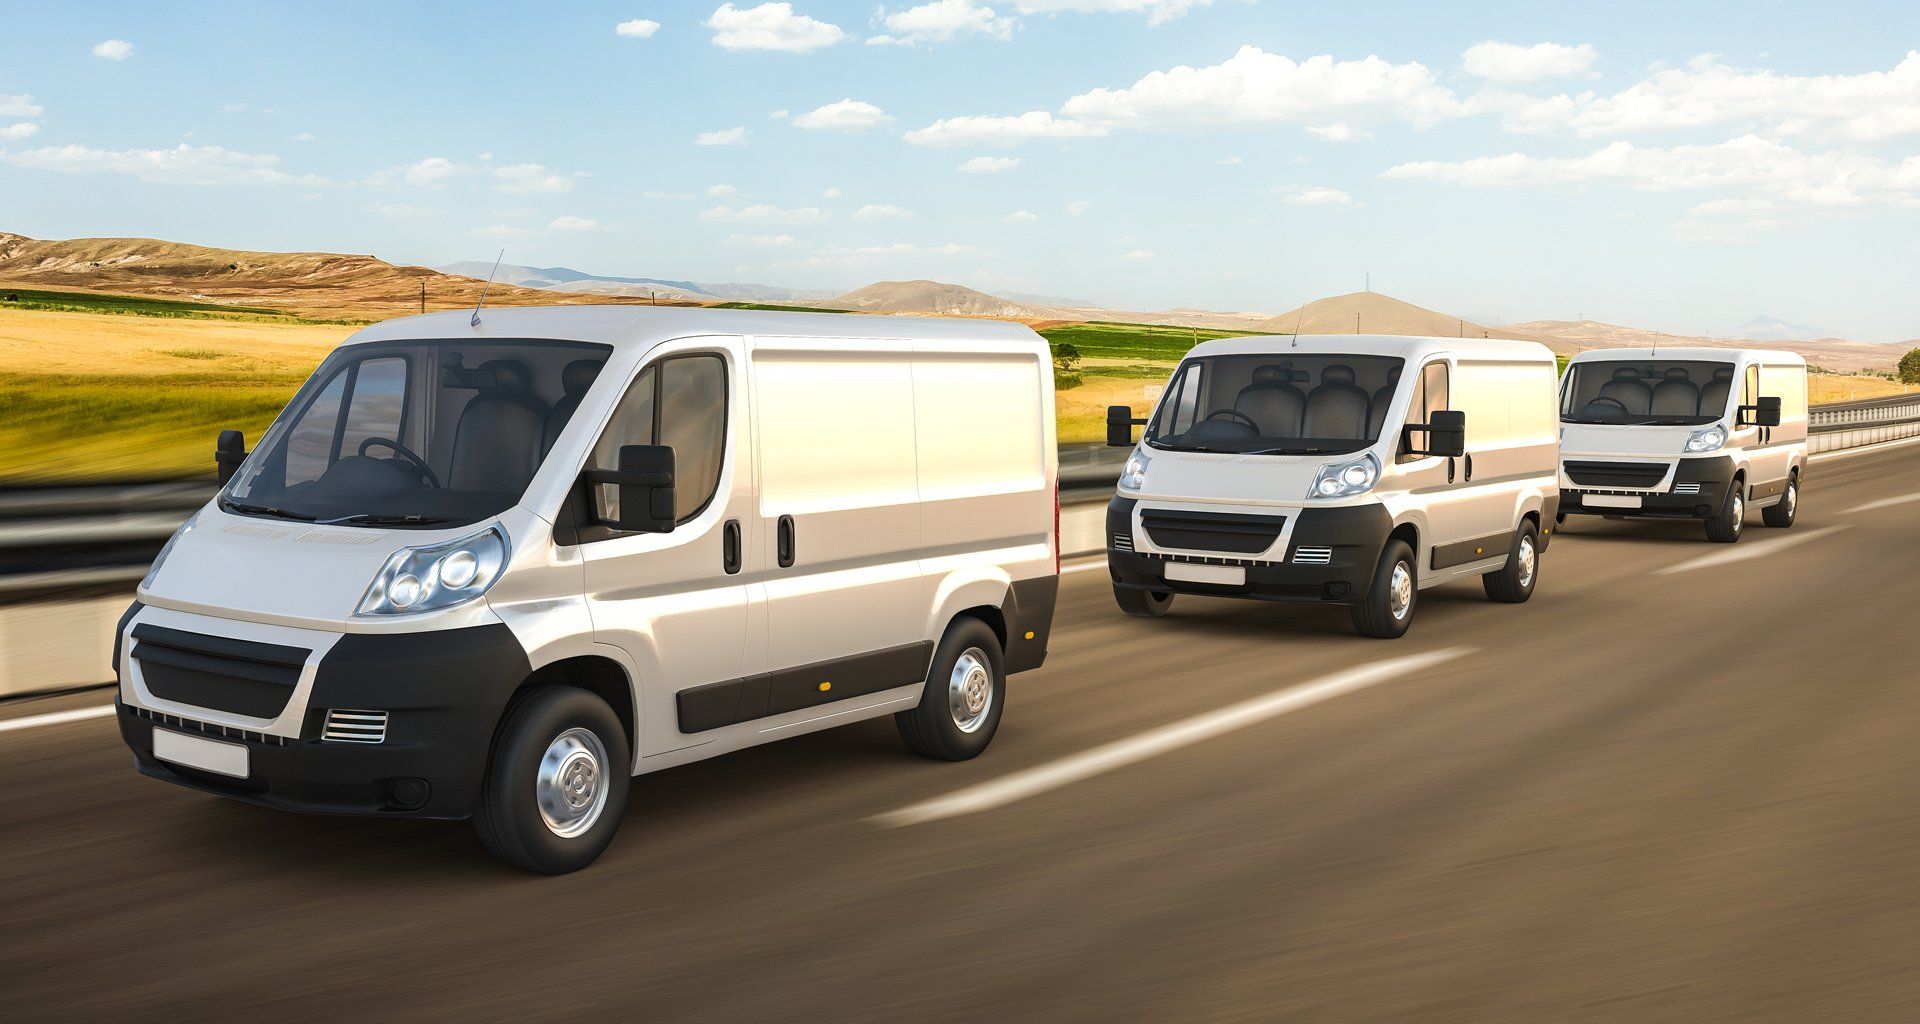 Delivery vehicles